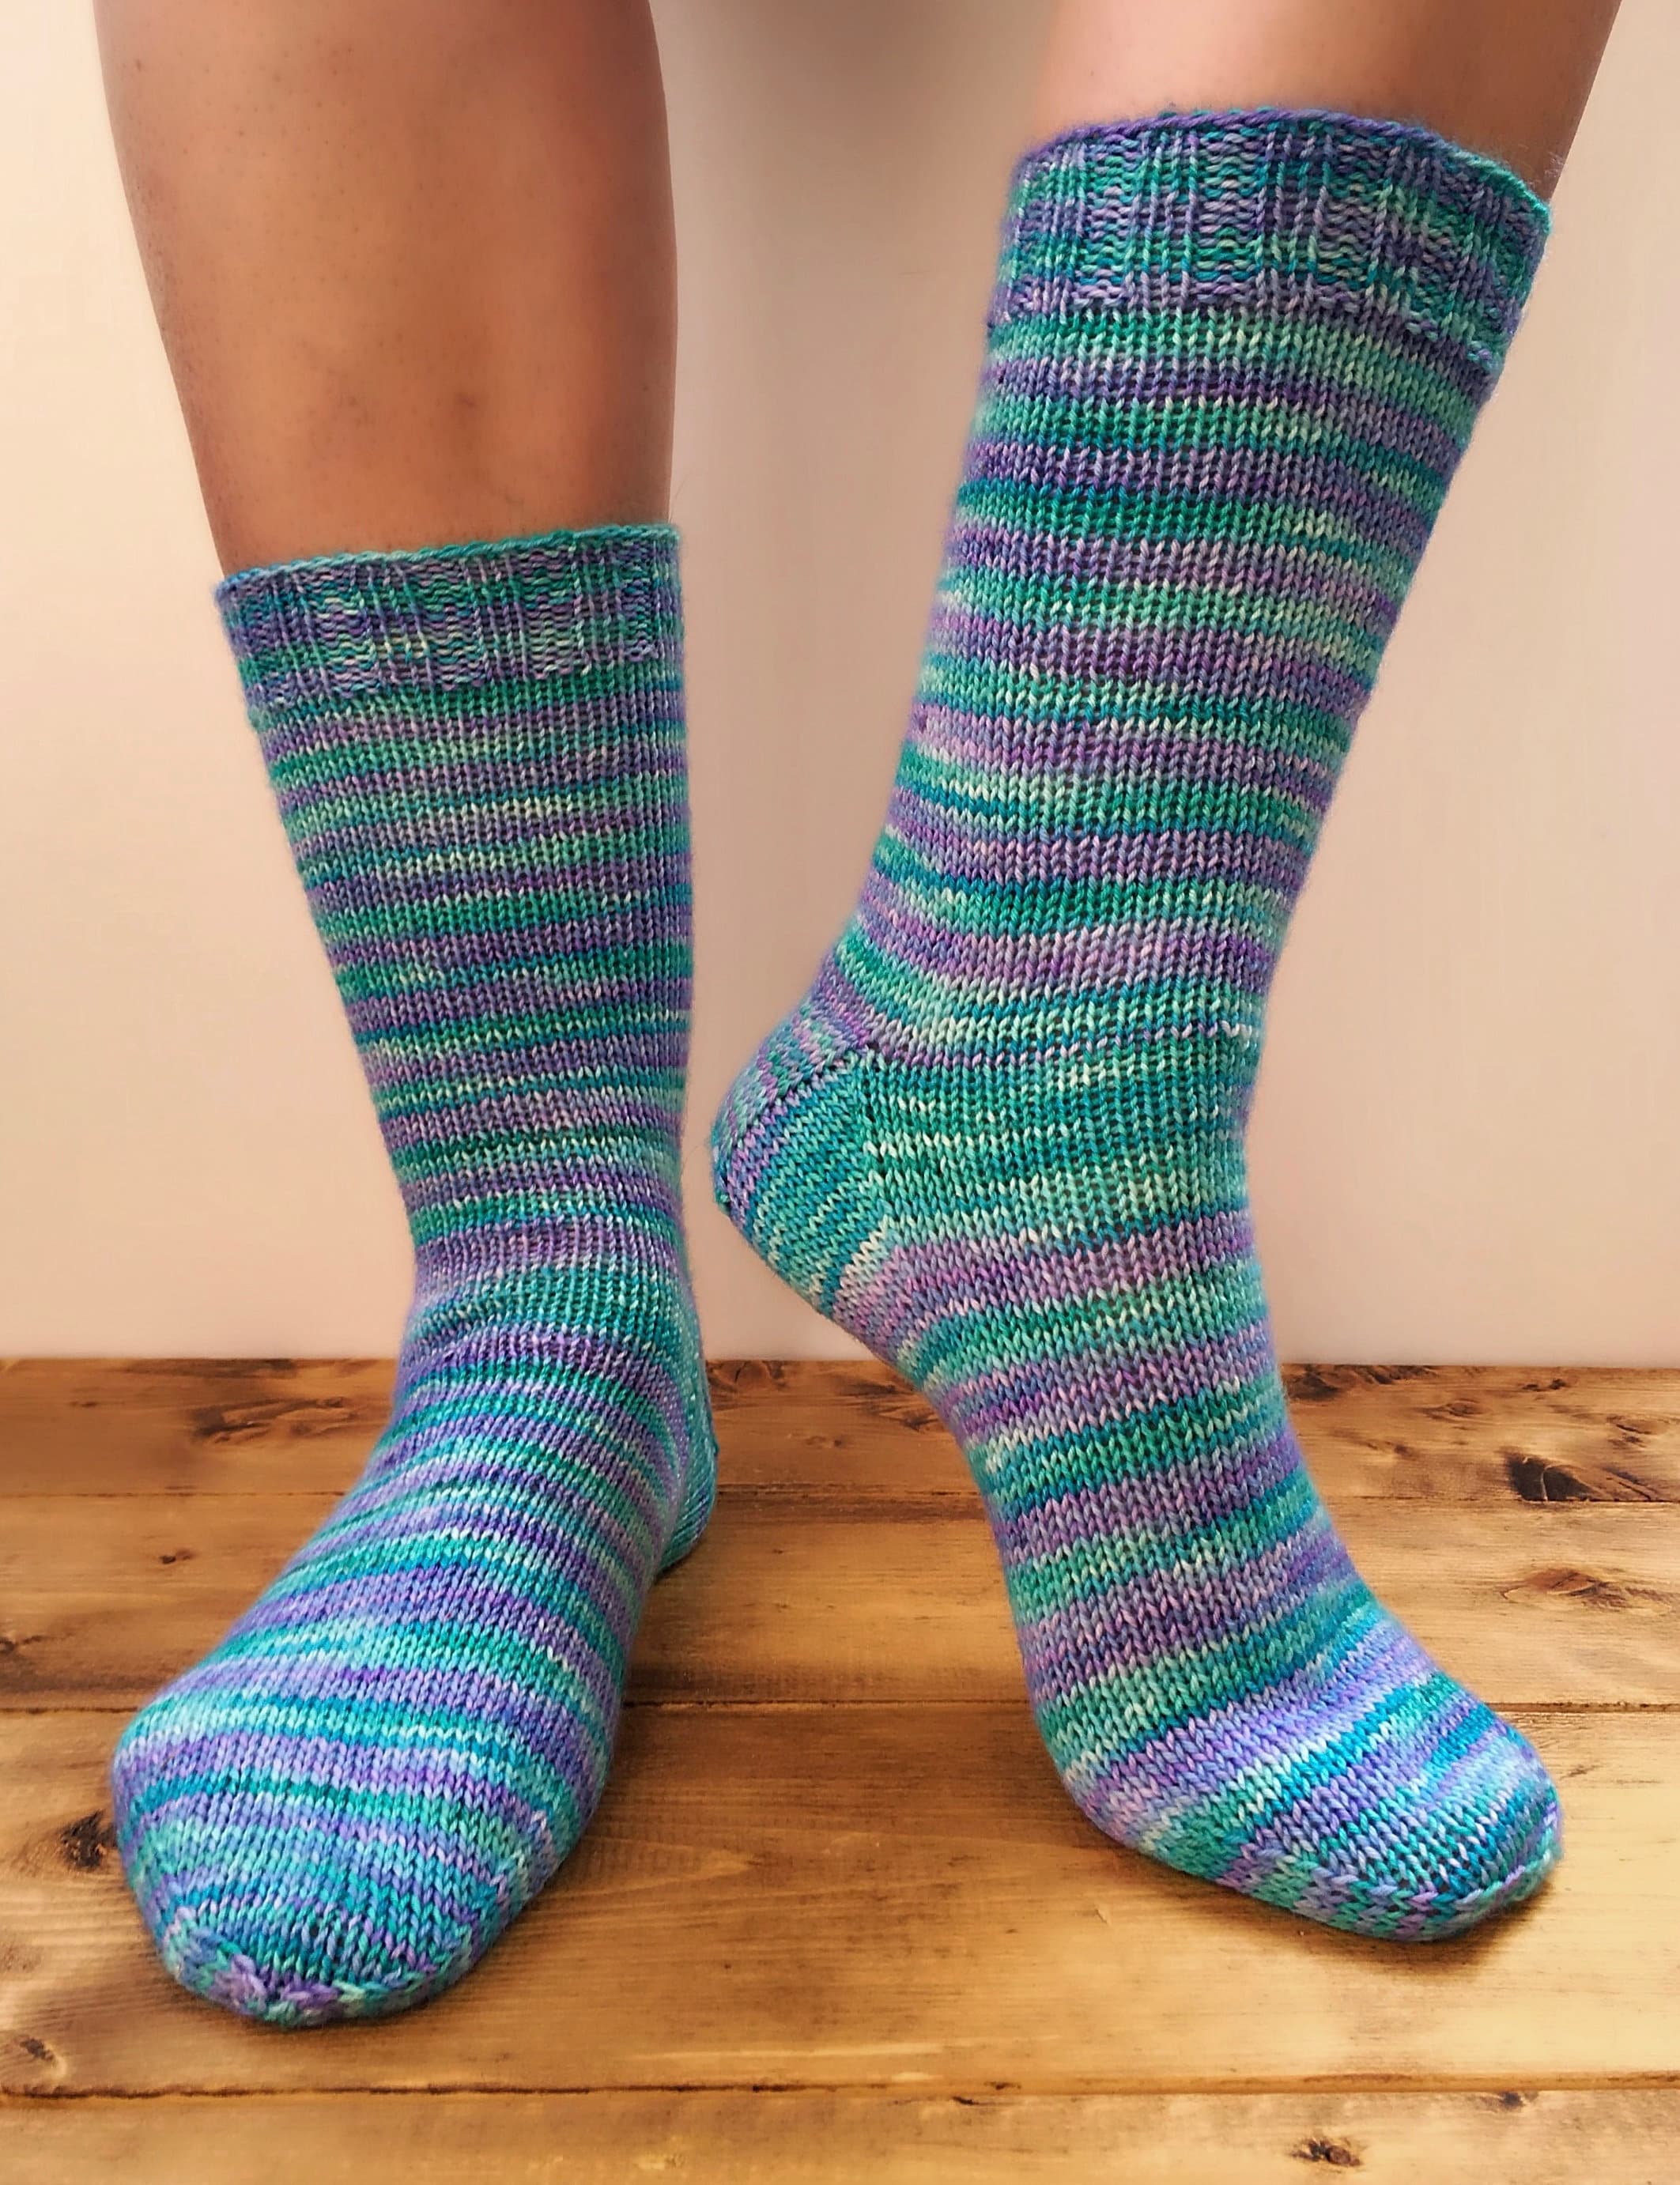 Coxswain Socks 3 adult sizes links to video tutorials included* Sock Knitting Pattern PDF *knitted top down easy lace pattern